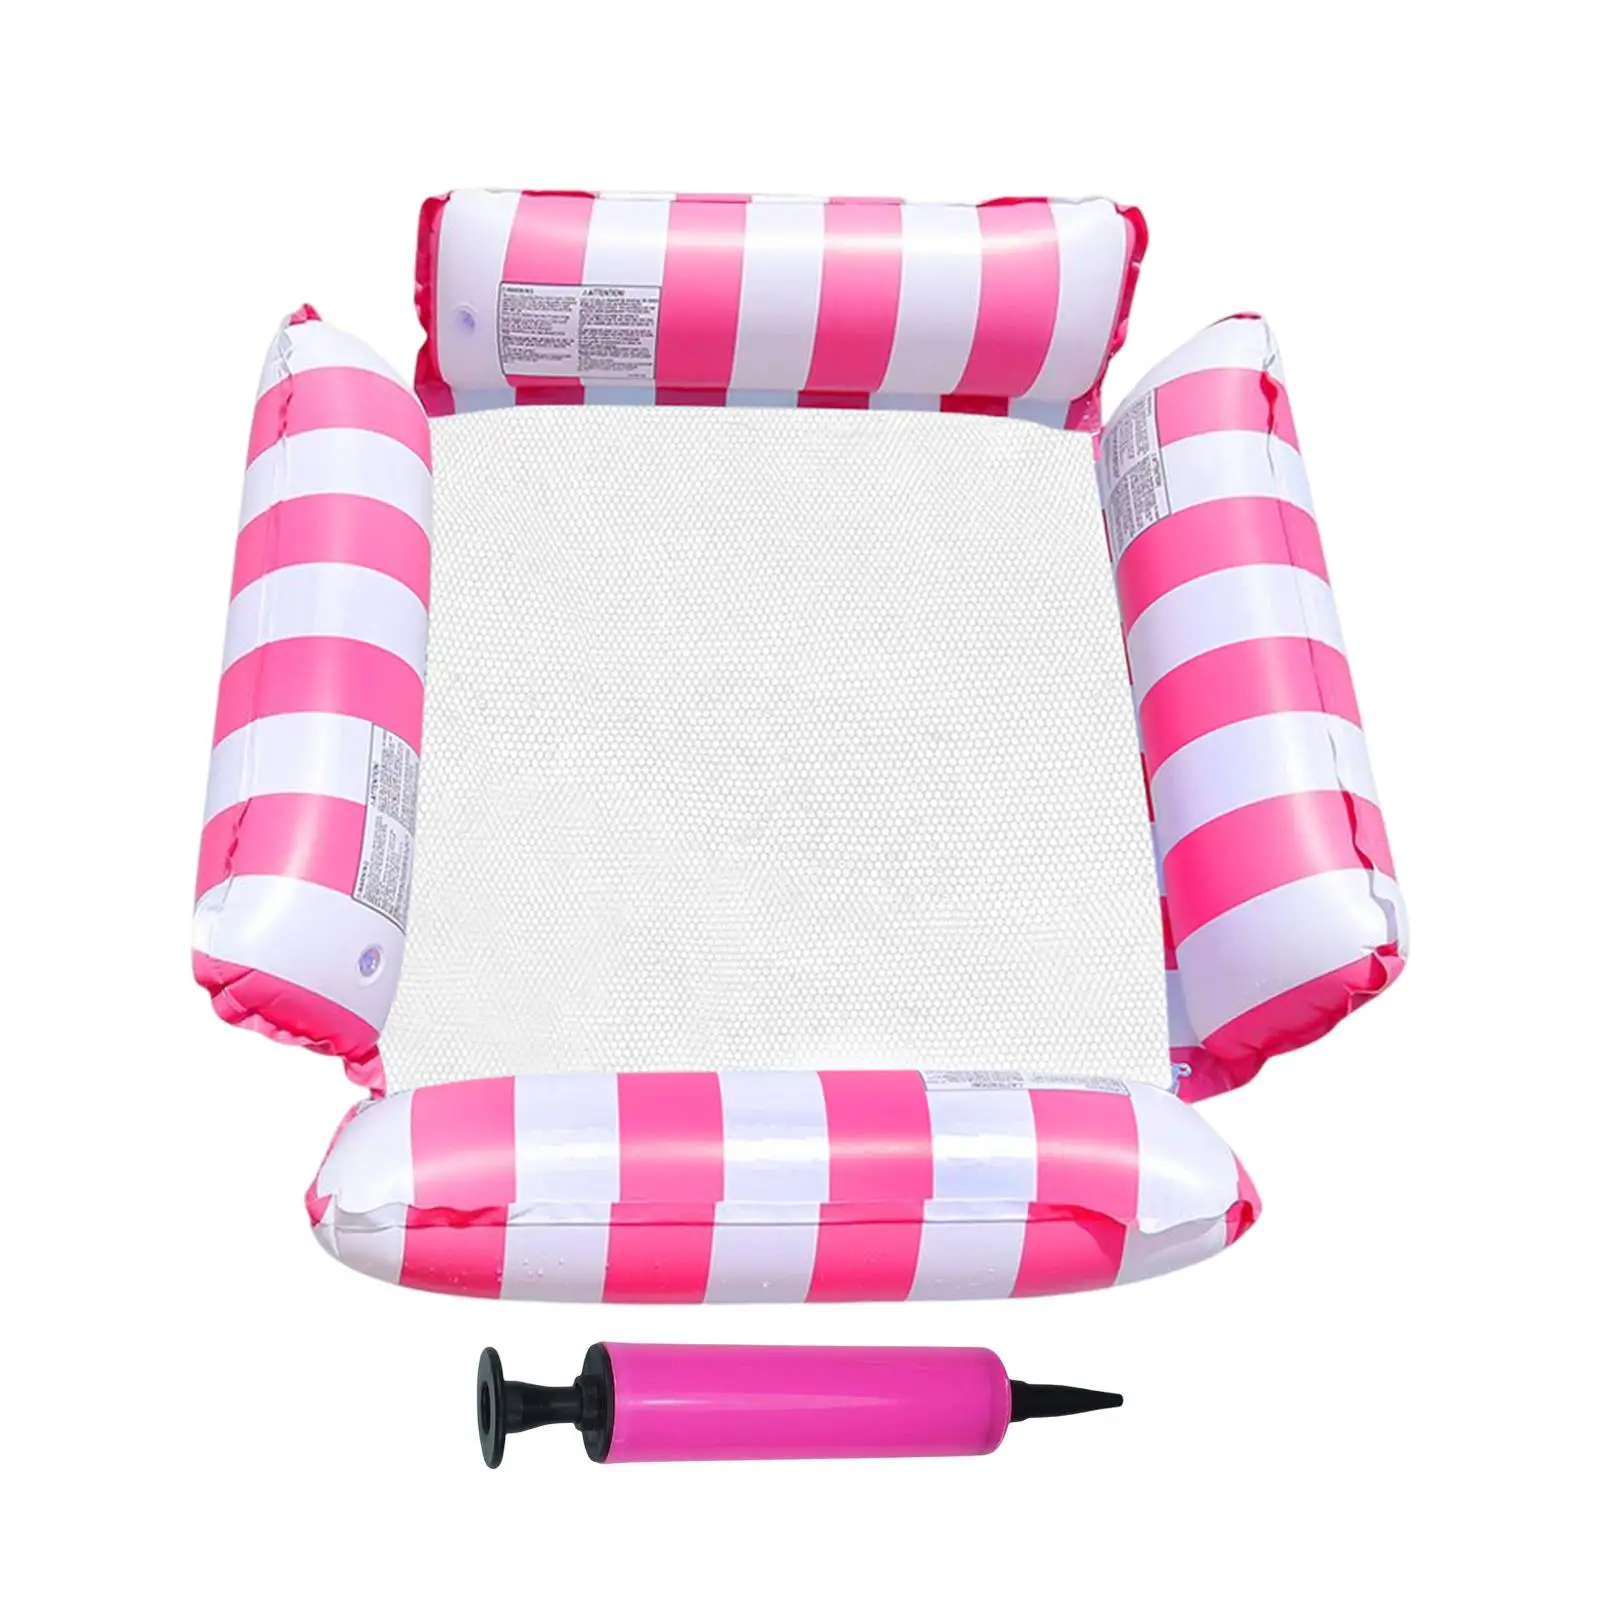 Water Hammock Water Toy with Air Pump Cushion Premium Float Lounge Chair Floating Chair for Beach Relaxing Travel Vocation Party